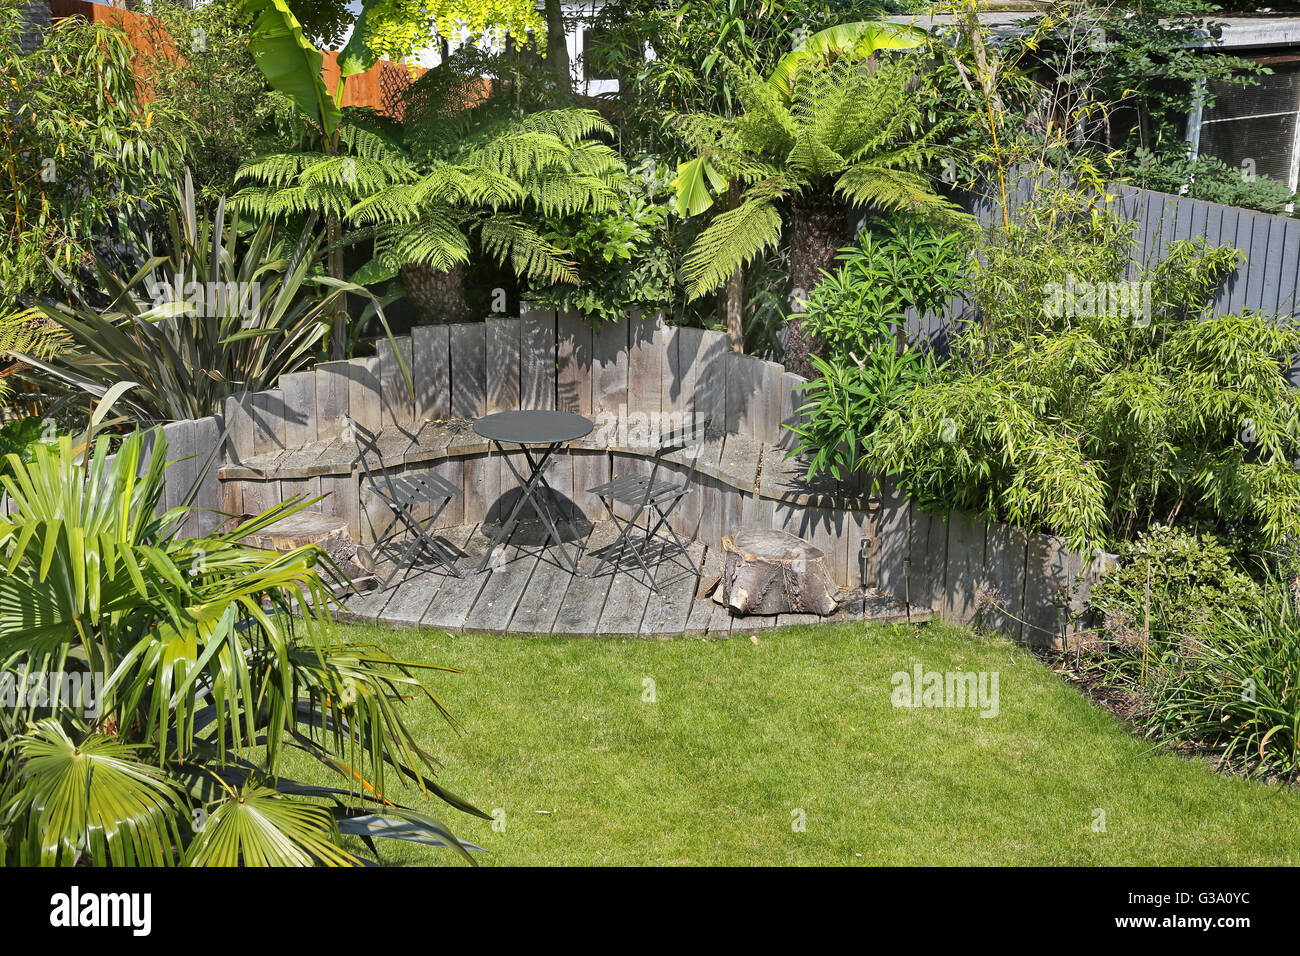 Decked seating area in a secluded London back garden featuring large, evergreen plants: tree ferns, bamboo, bananas and japonica Stock Photo